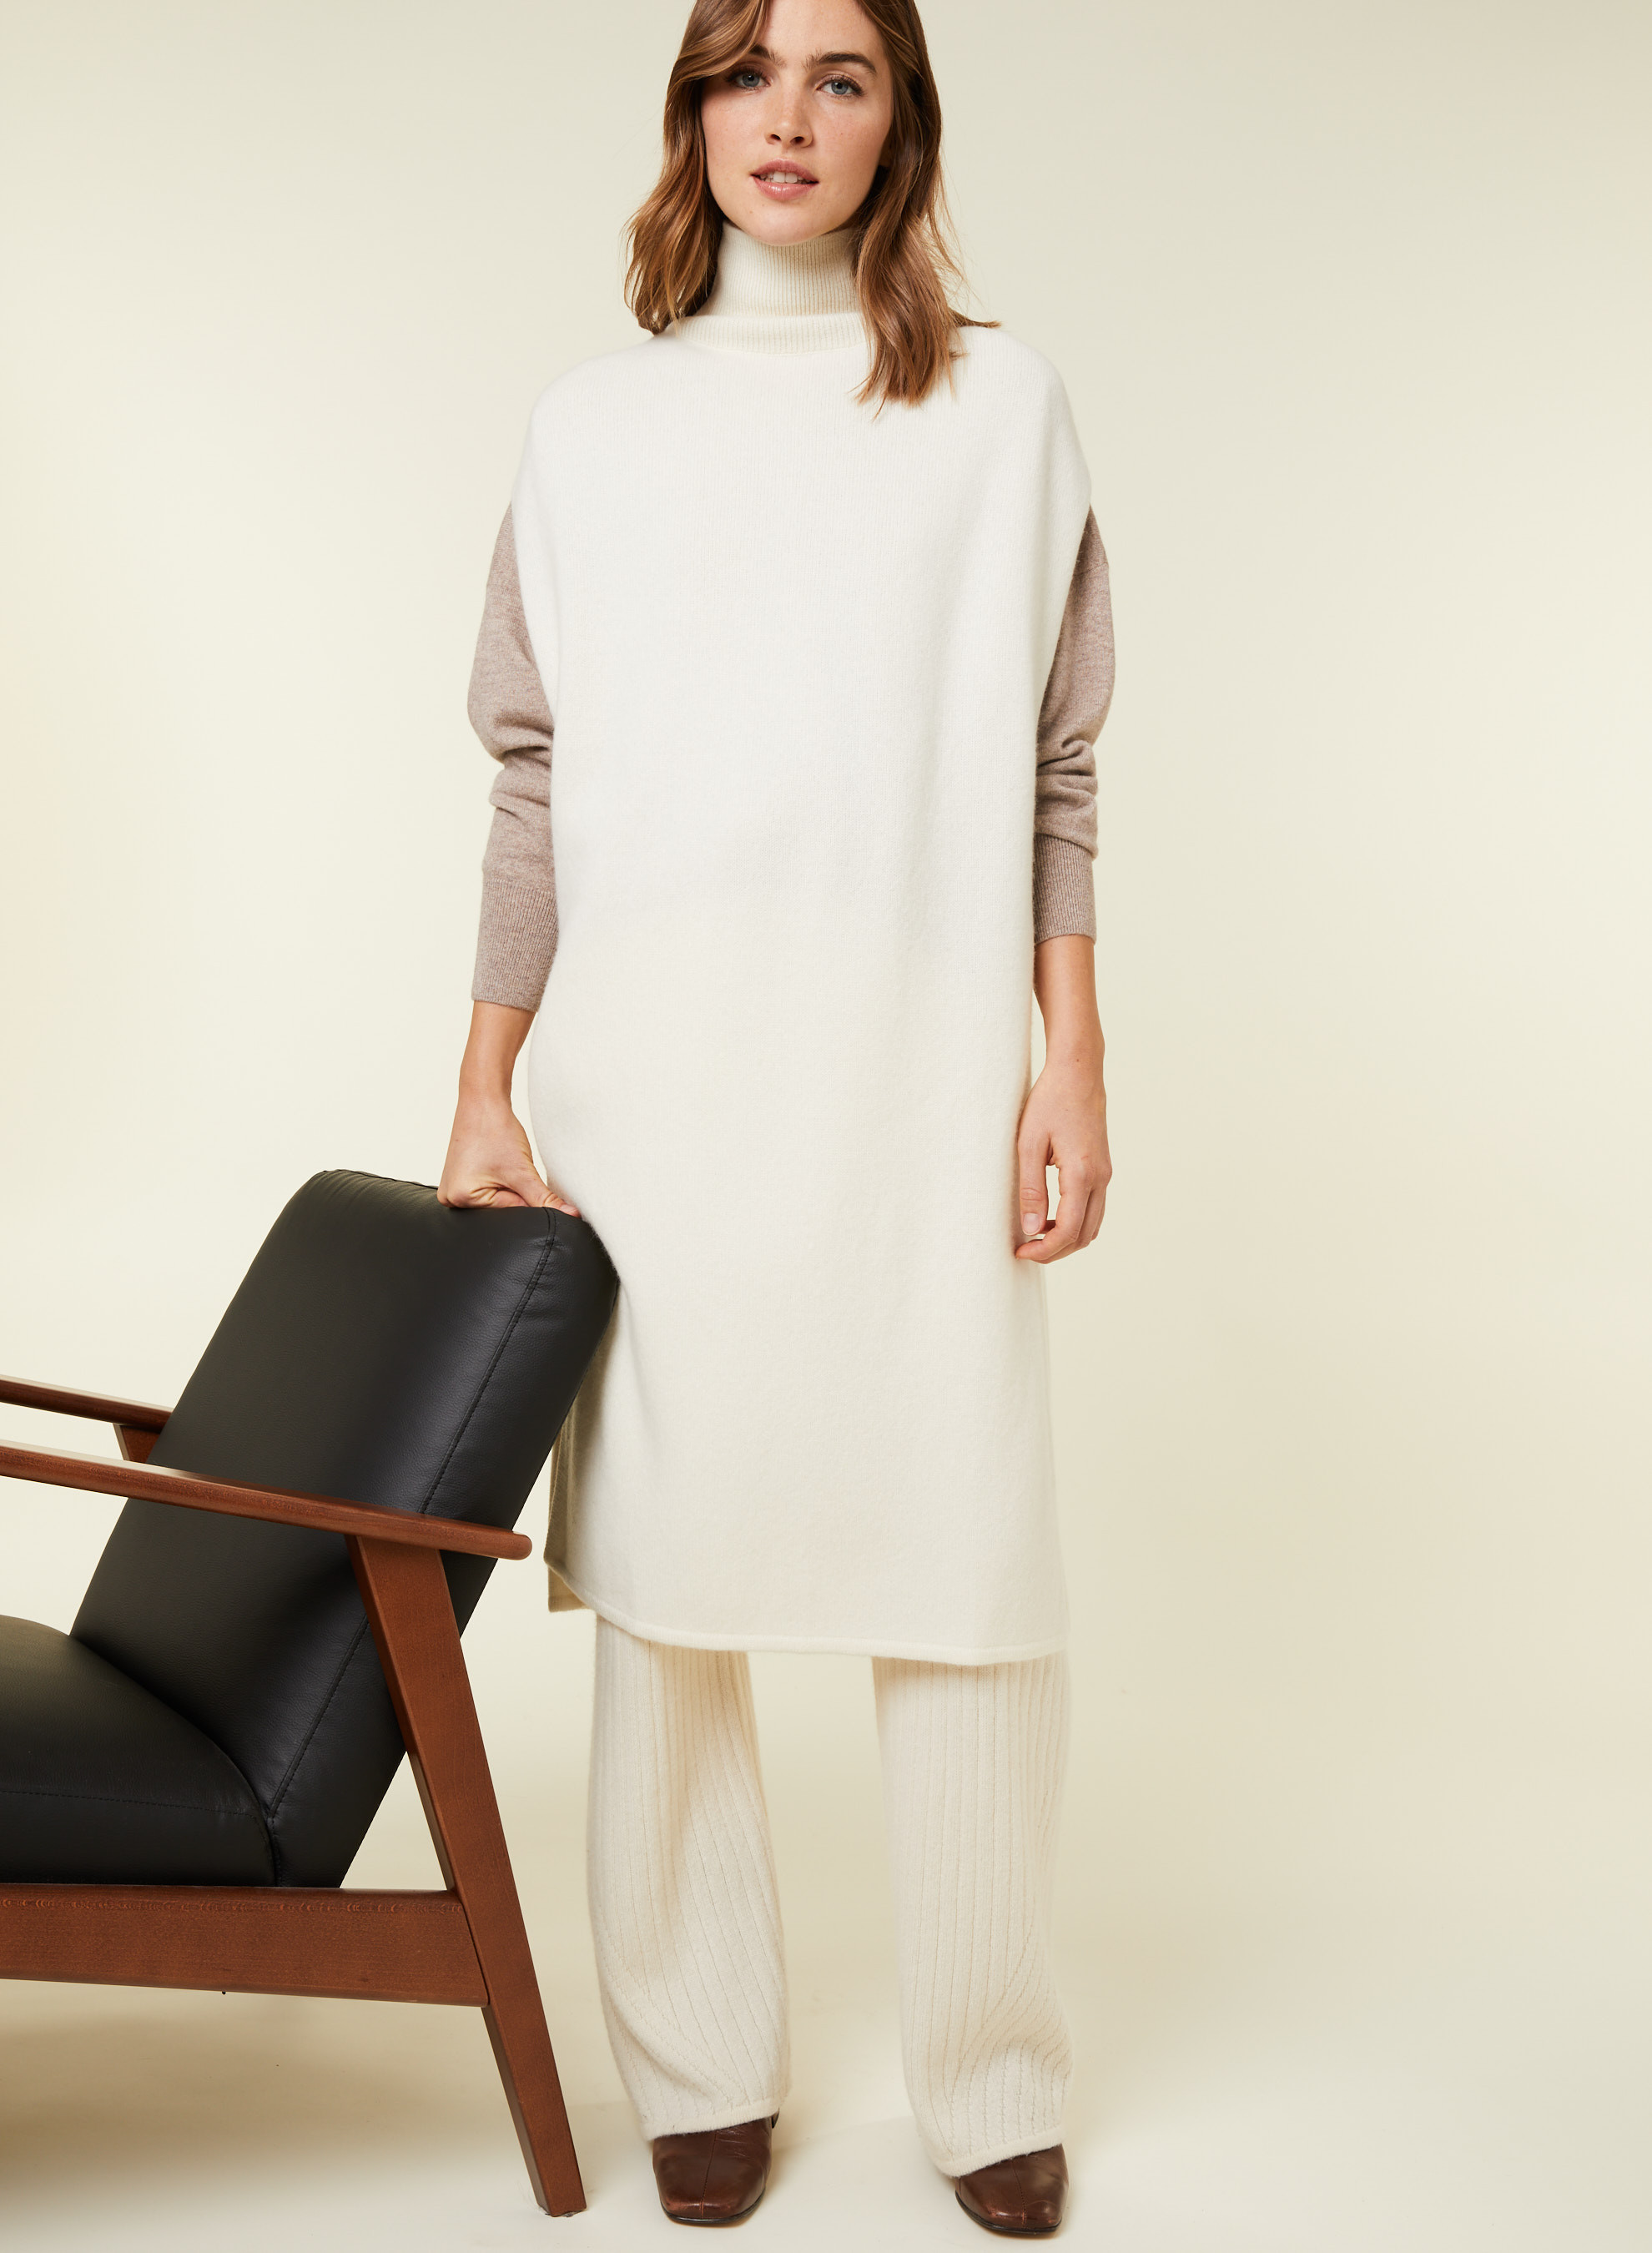 https://us.montagut.com/29767-thickbox_default/sleeveless-high-neck-tunic-in-wool-and-cashmere-garance.jpg